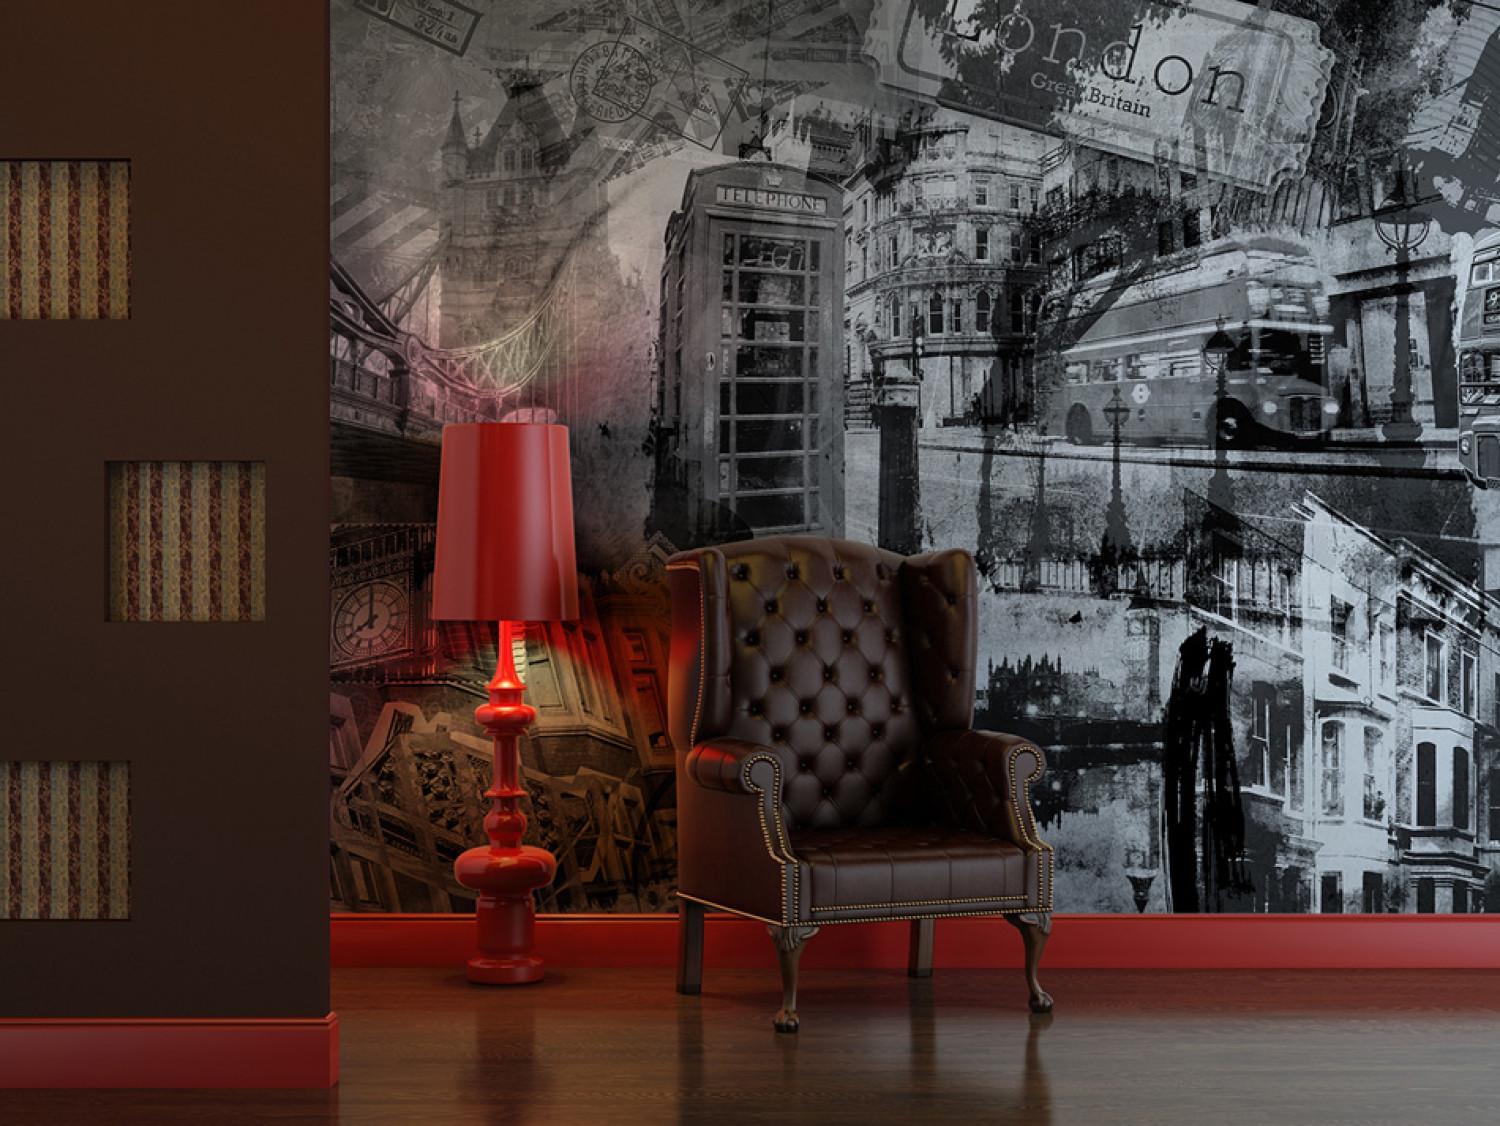 Wall Mural London - black and white collage with architectural and automotive elements